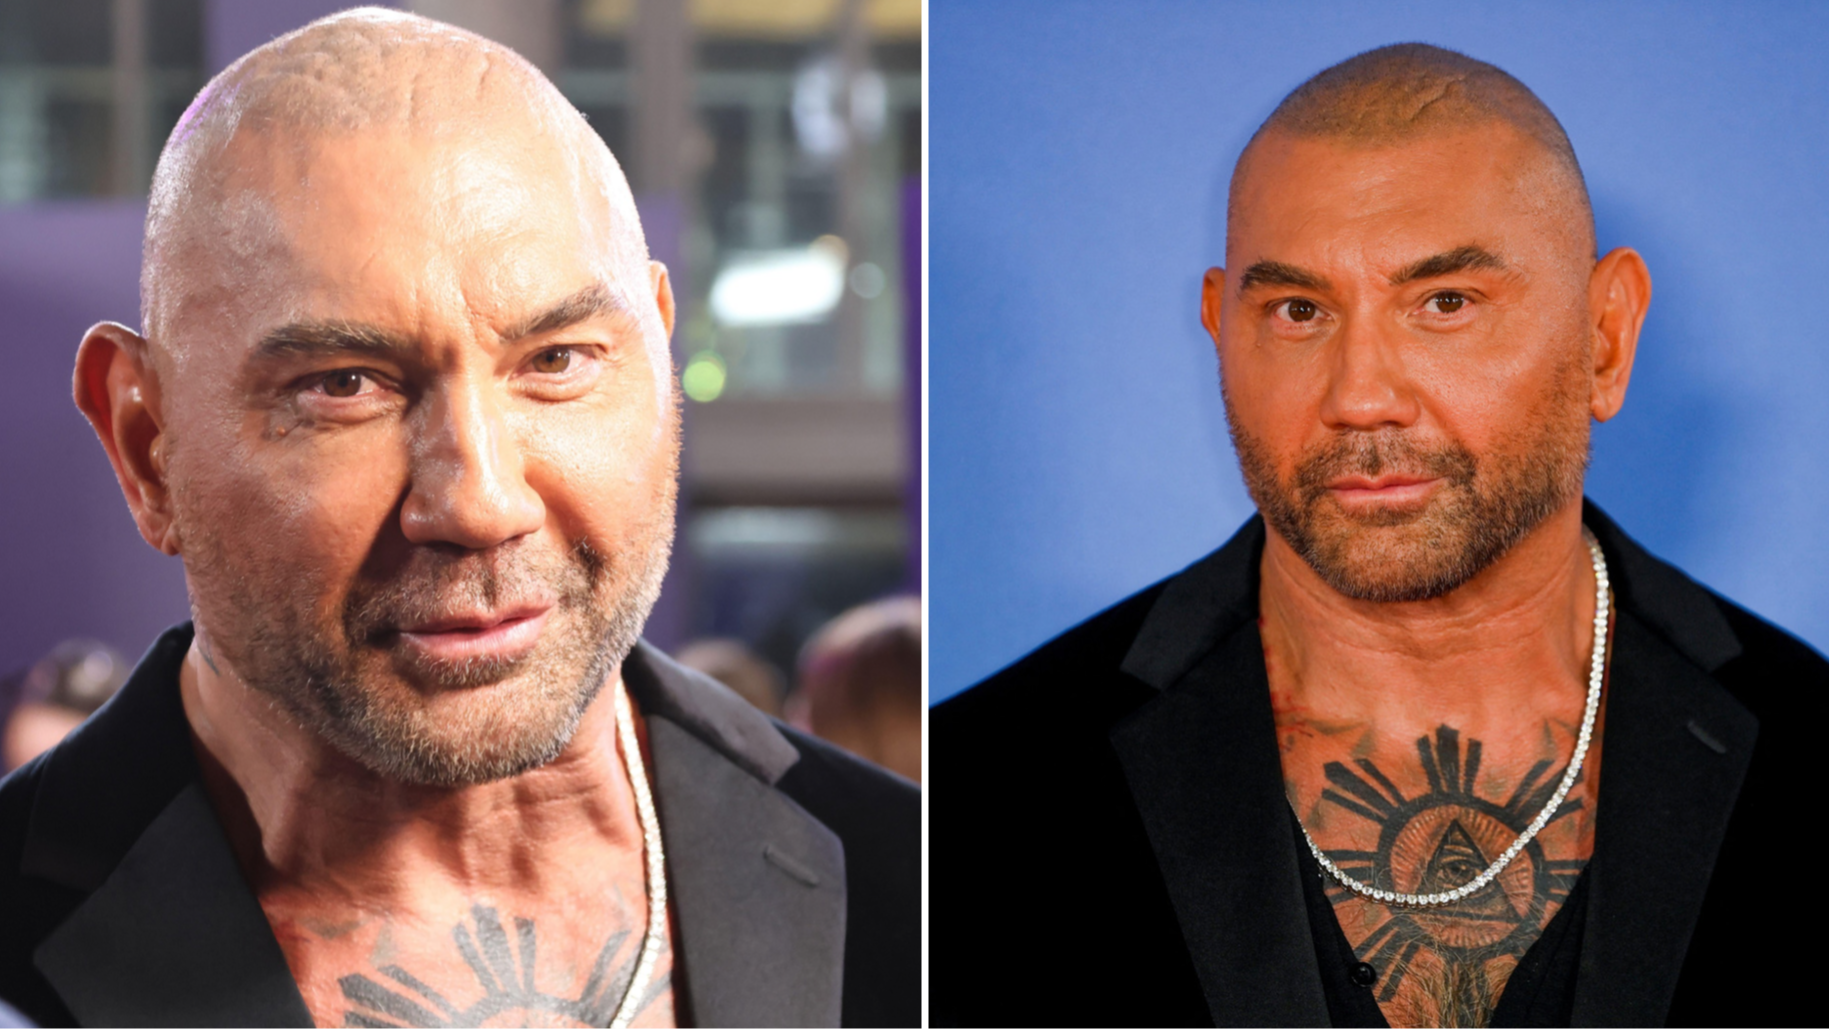 Dave Bautista png images